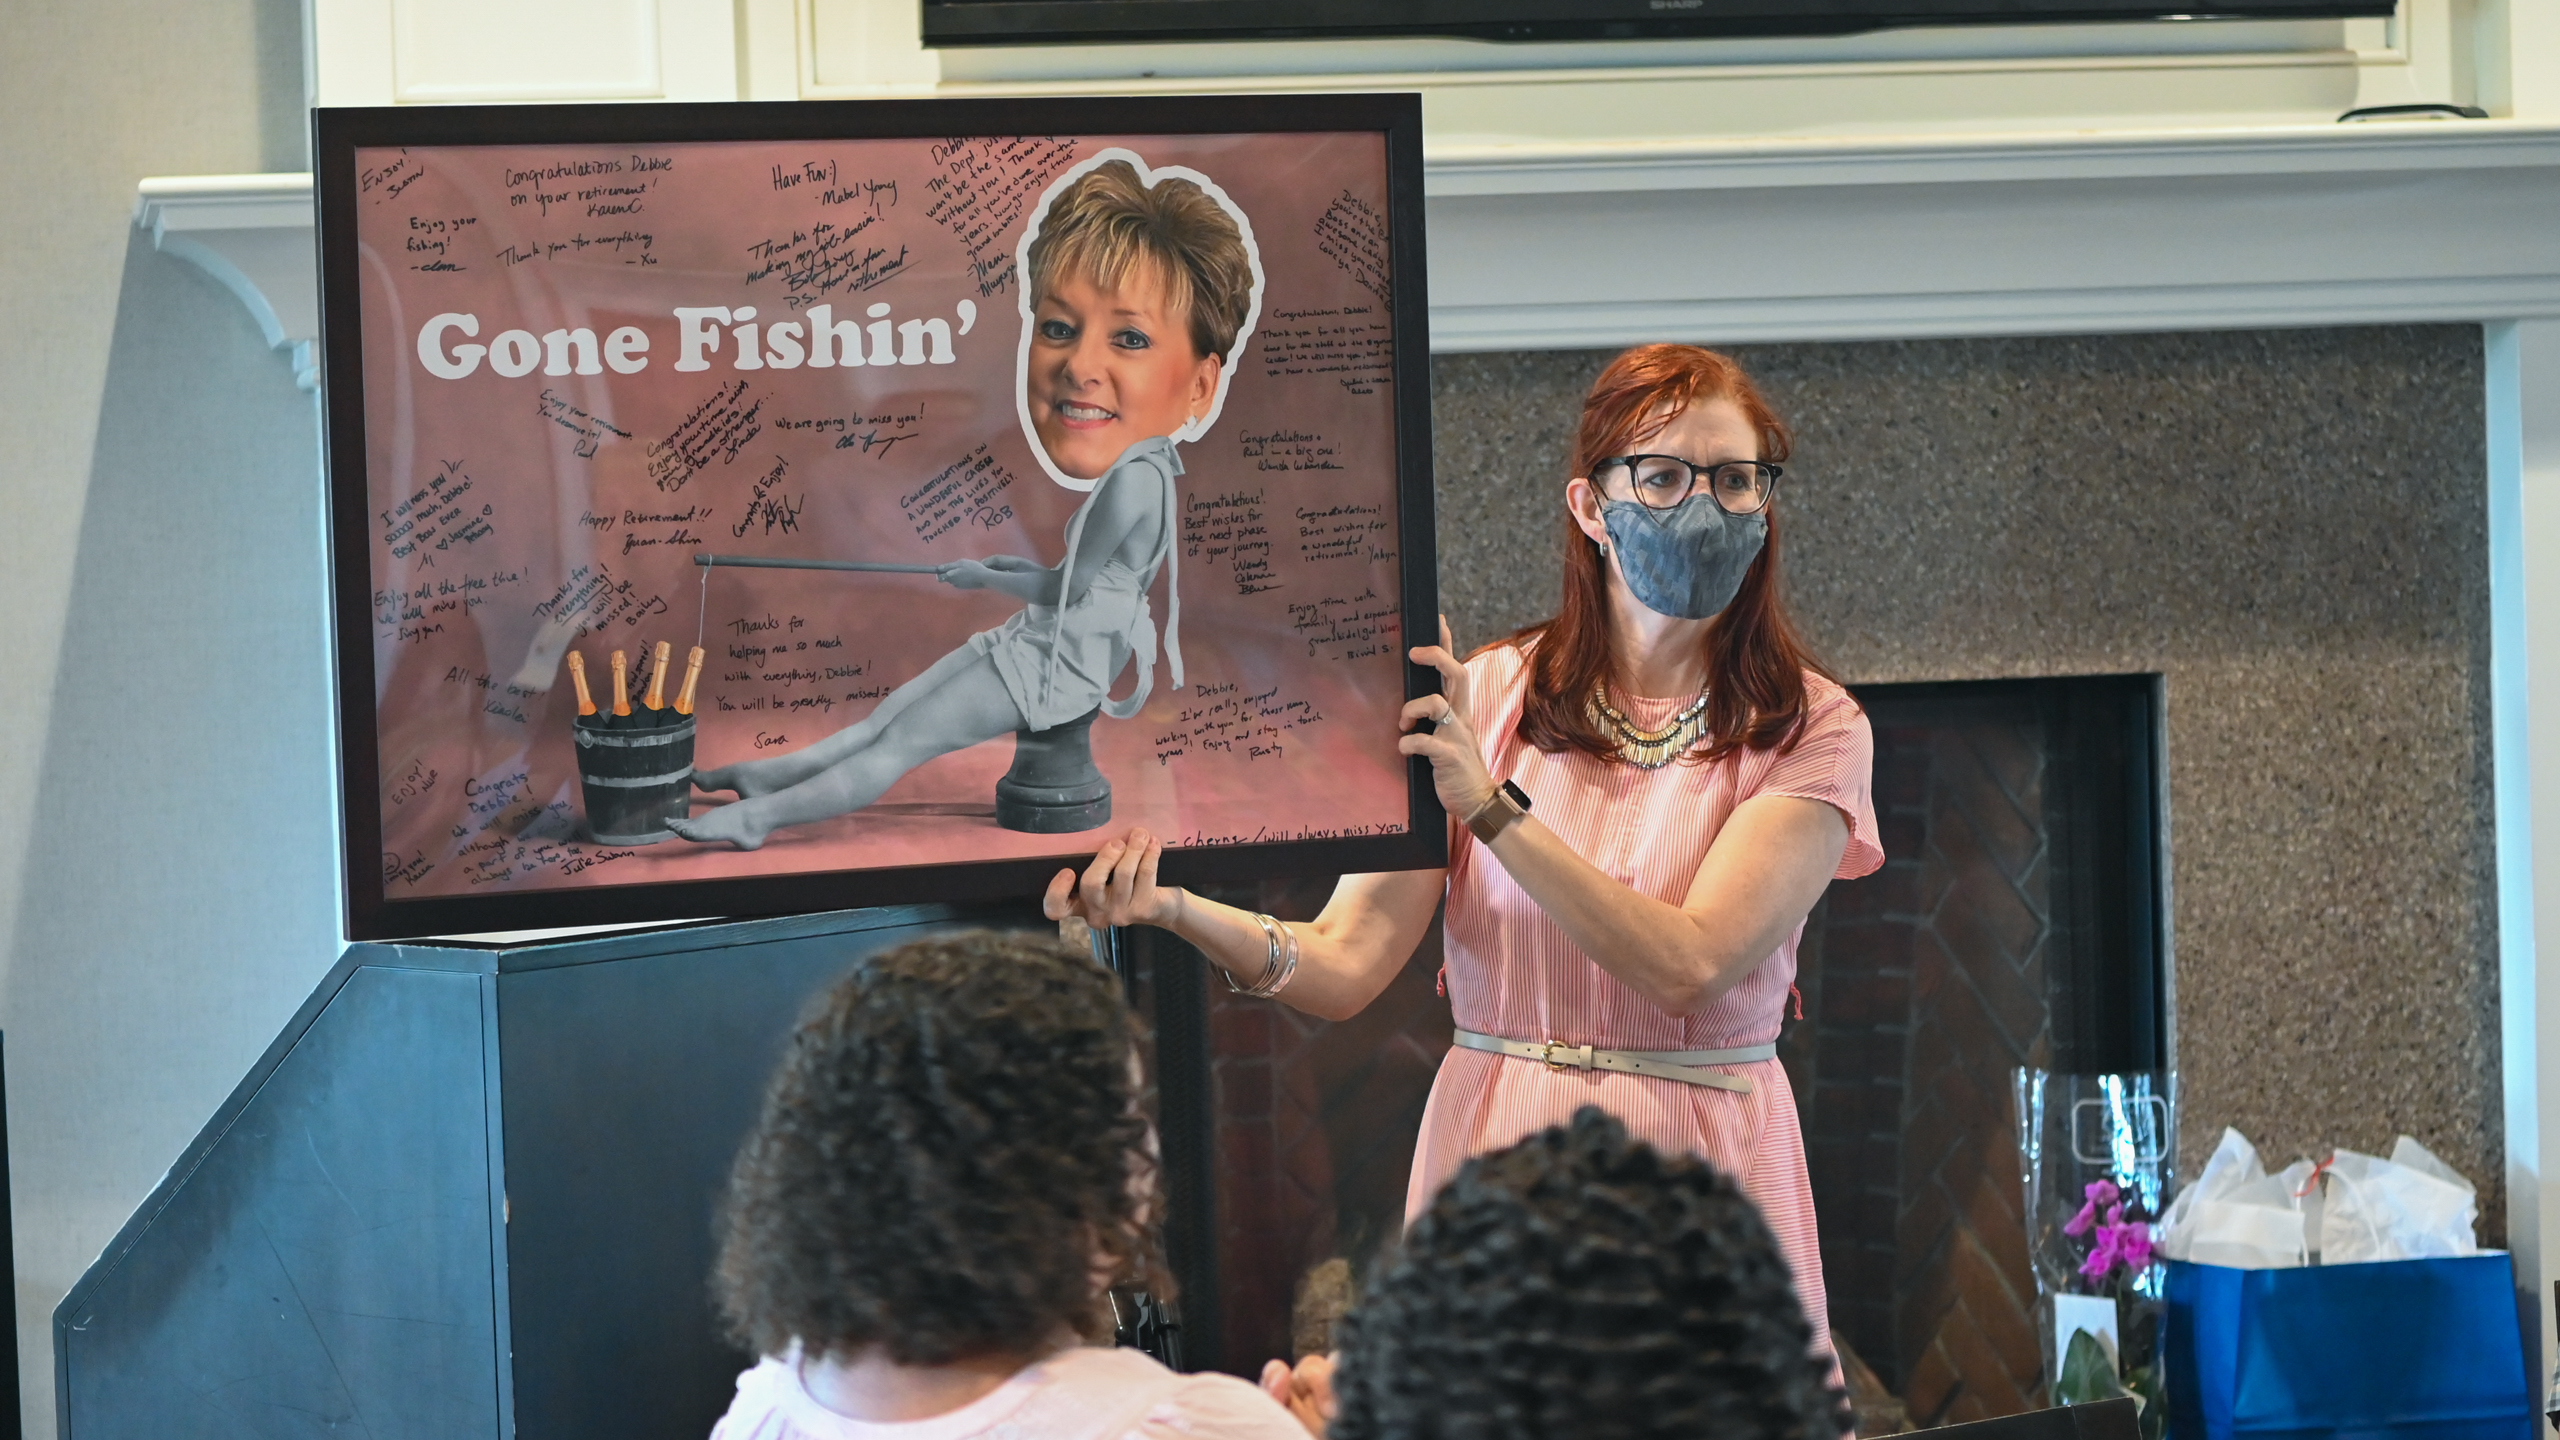 Julie Swann shows a goodbye poster that says Gone Fishin'. The poster is covered with signatures.